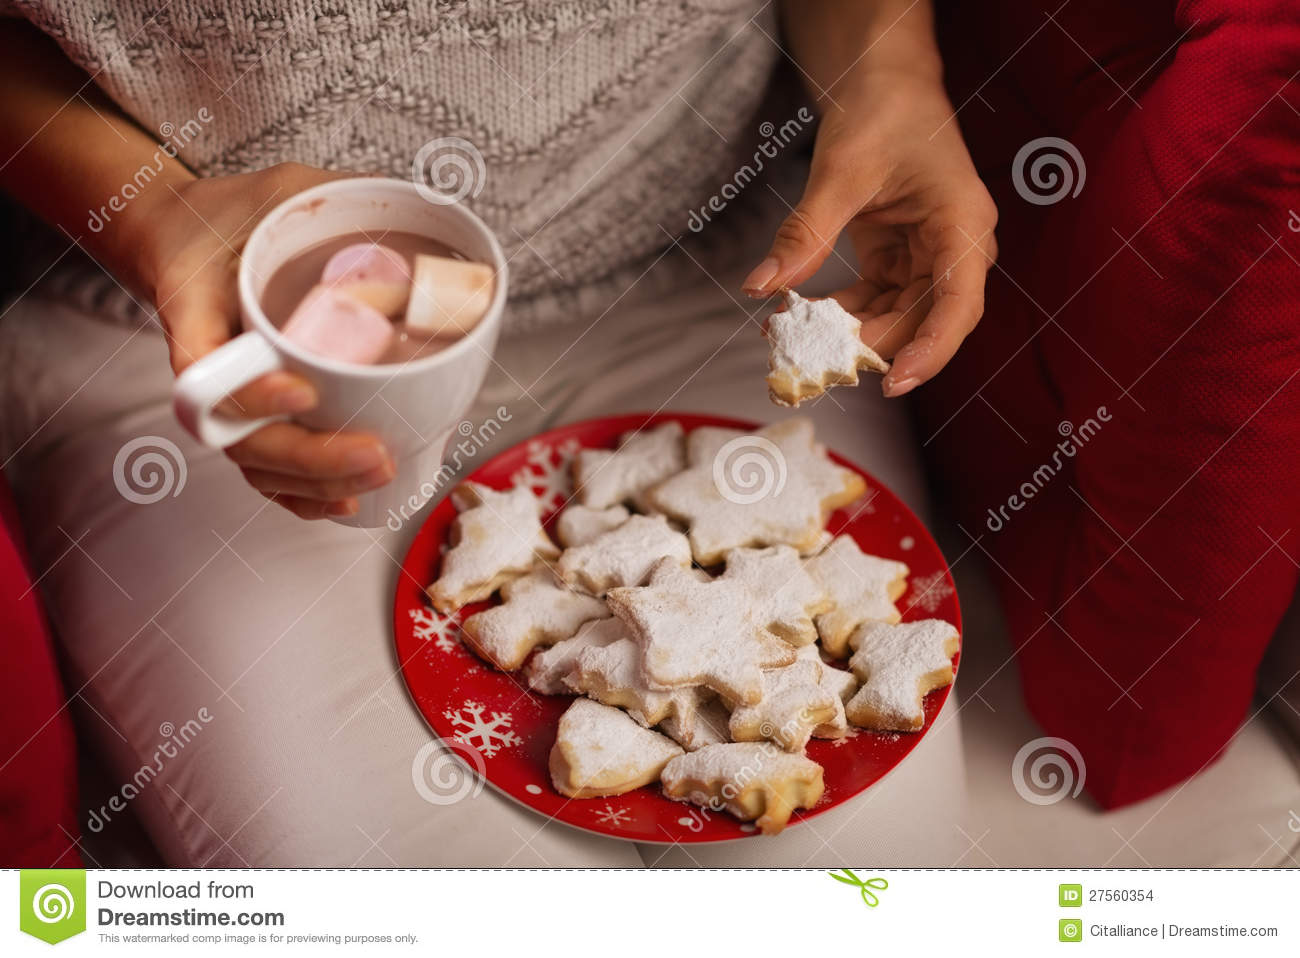 Closeup On Woman Eating Christmas Cookie And Drinking Hot Chocolate